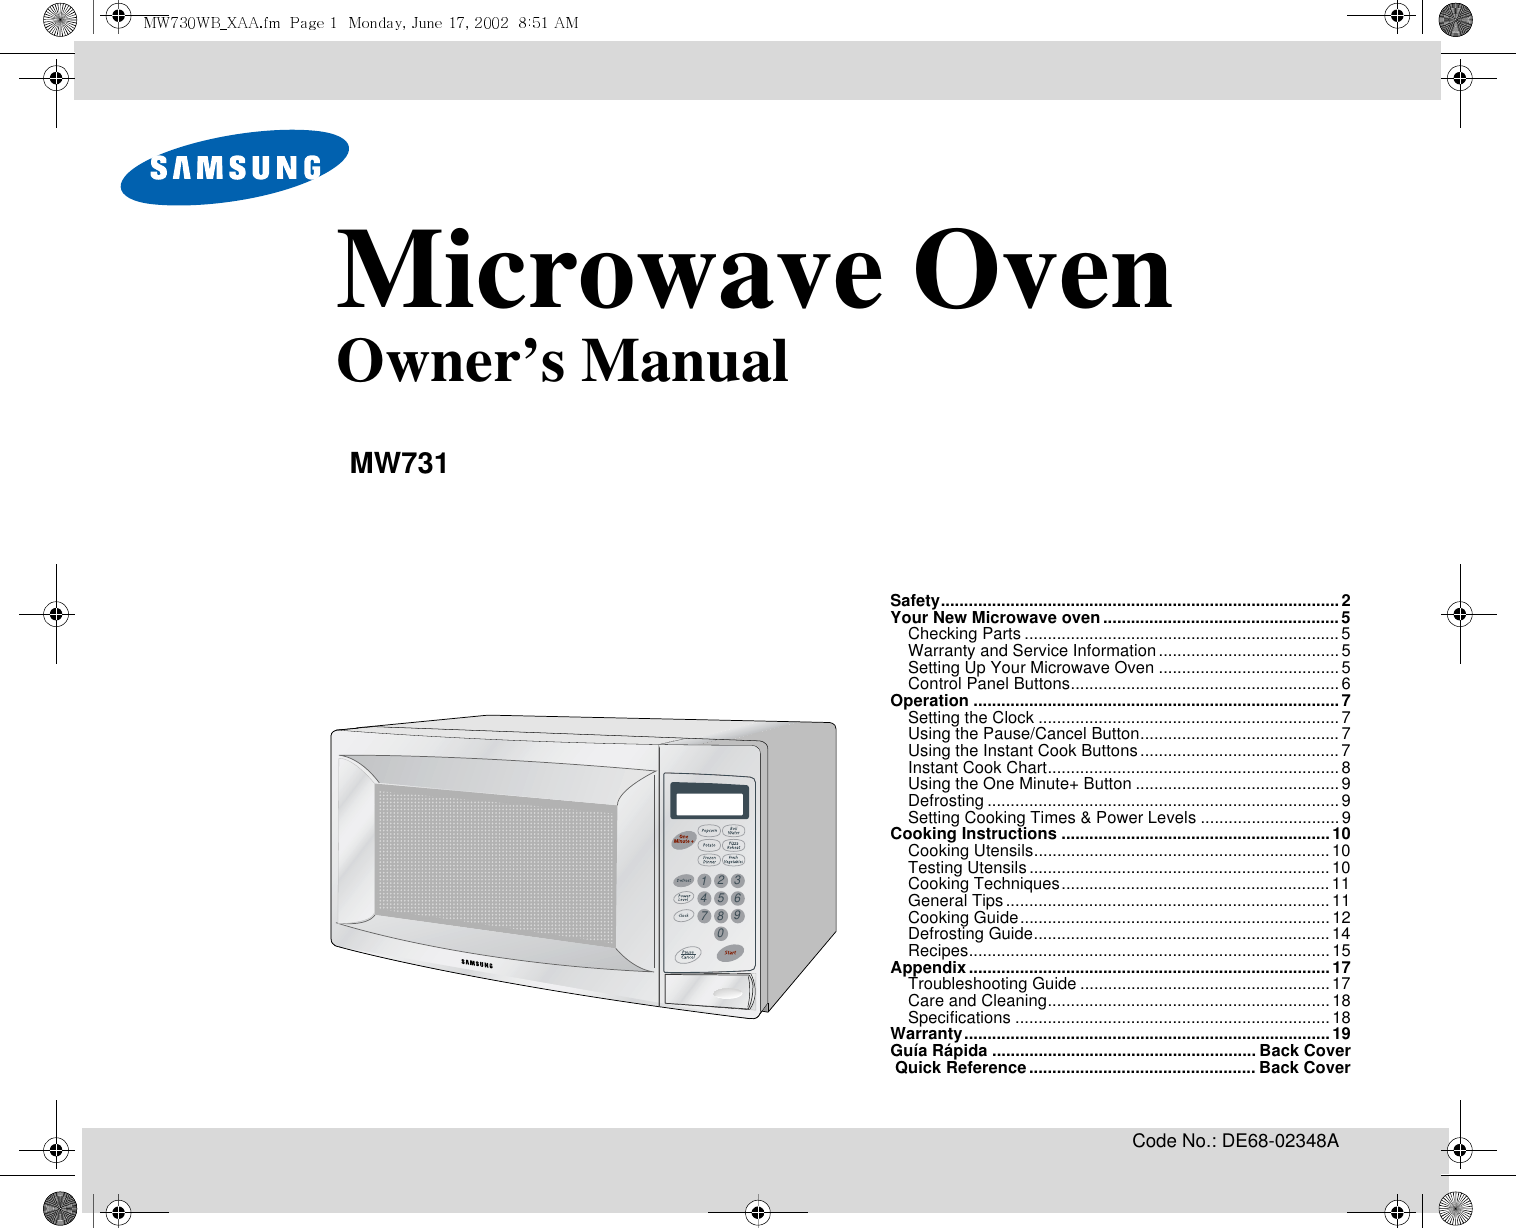 Code No.: DE68-02348A3216549870Microwave OvenOwner’s ManualMW731Safety......................................................................................2Your New Microwave oven...................................................5Checking Parts ....................................................................5Warranty and Service Information.......................................5Setting Up Your Microwave Oven .......................................5Control Panel Buttons..........................................................6Operation ...............................................................................7Setting the Clock .................................................................7Using the Pause/Cancel Button...........................................7Using the Instant Cook Buttons...........................................7Instant Cook Chart...............................................................8Using the One Minute+ Button ............................................9Defrosting ............................................................................9Setting Cooking Times &amp; Power Levels ..............................9Cooking Instructions ..........................................................10Cooking Utensils................................................................10Testing Utensils.................................................................10Cooking Techniques..........................................................11General Tips......................................................................11Cooking Guide...................................................................12Defrosting Guide................................................................14Recipes..............................................................................15Appendix..............................................................................17Troubleshooting Guide ......................................................17Care and Cleaning.............................................................18Specifications ....................................................................18Warranty...............................................................................19Guía Rápida ......................................................... Back Cover Quick Reference................................................. Back Cover